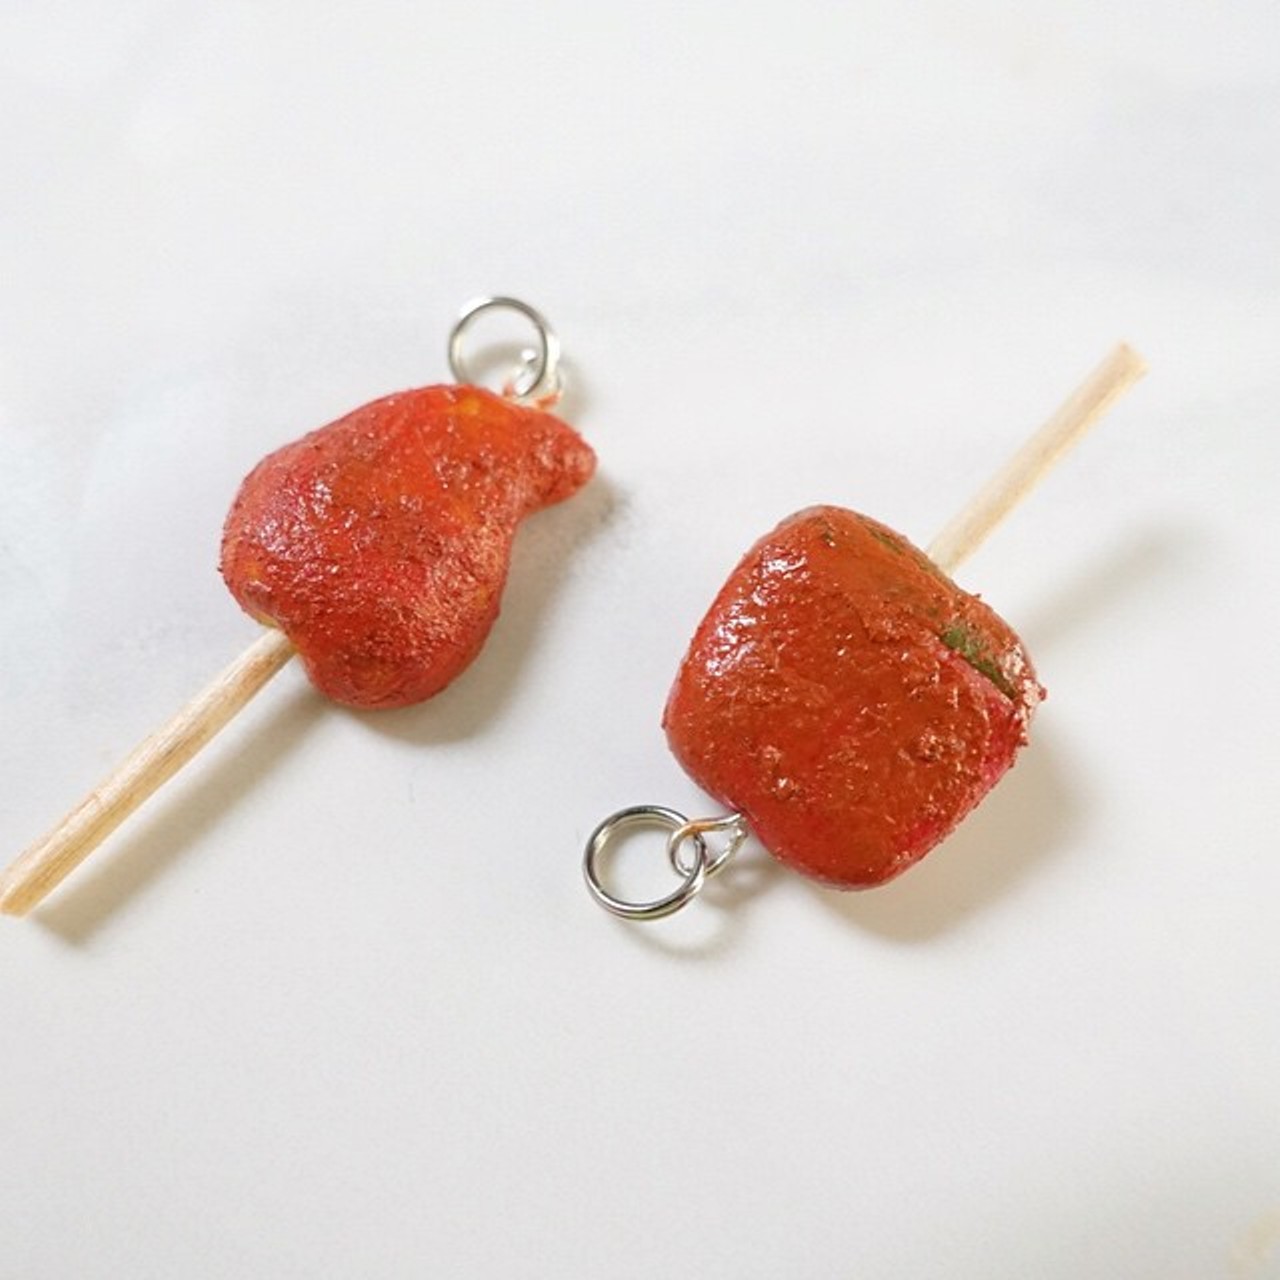 13 Deliciously Cute Items From Sweet Craft Jewelry